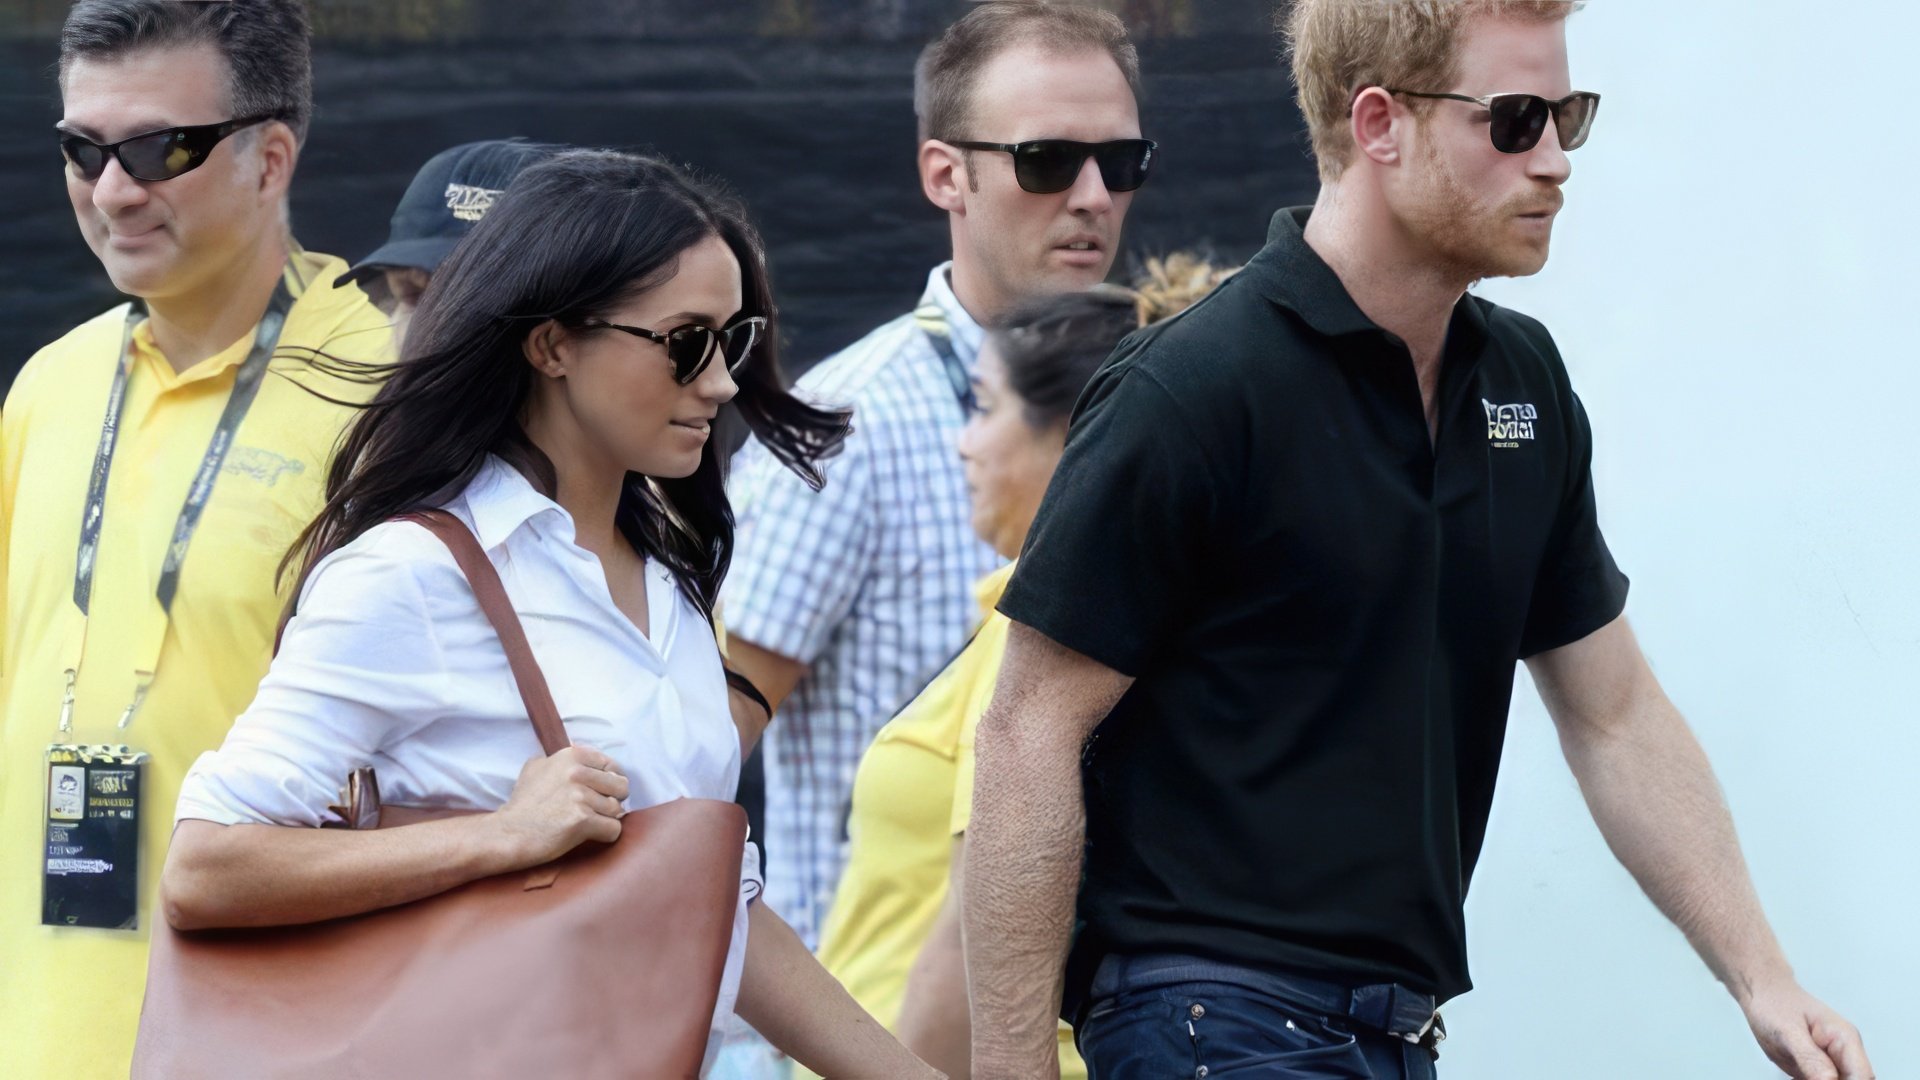 Rumors of Meghan Markle's relationship with Prince Harry emerged in early 2016